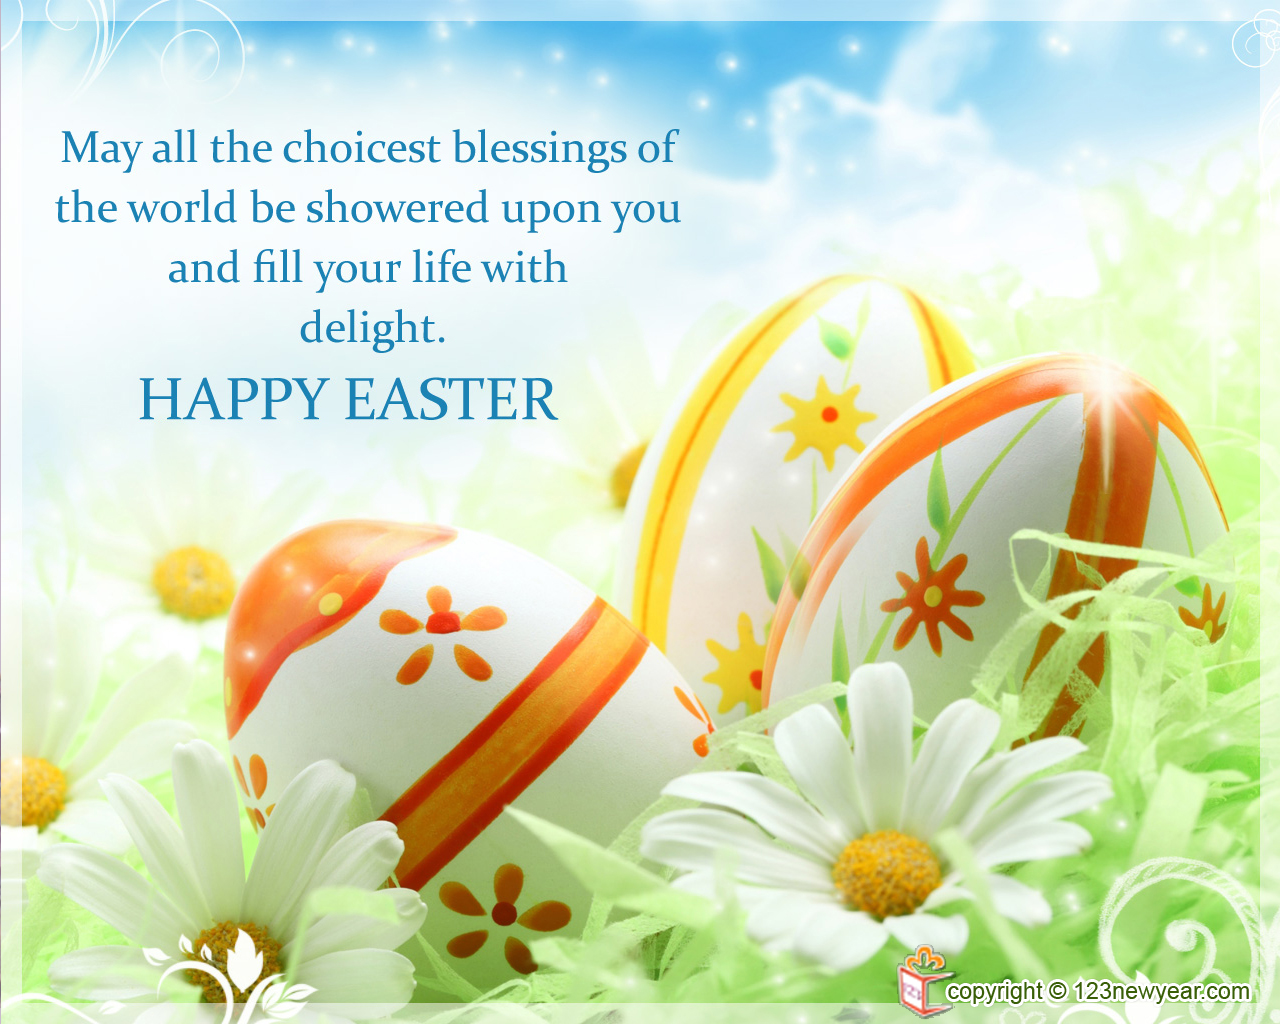 Happy Easter Wishes Messages   Happy Easter Sunday Wishes 842824 1280x1024